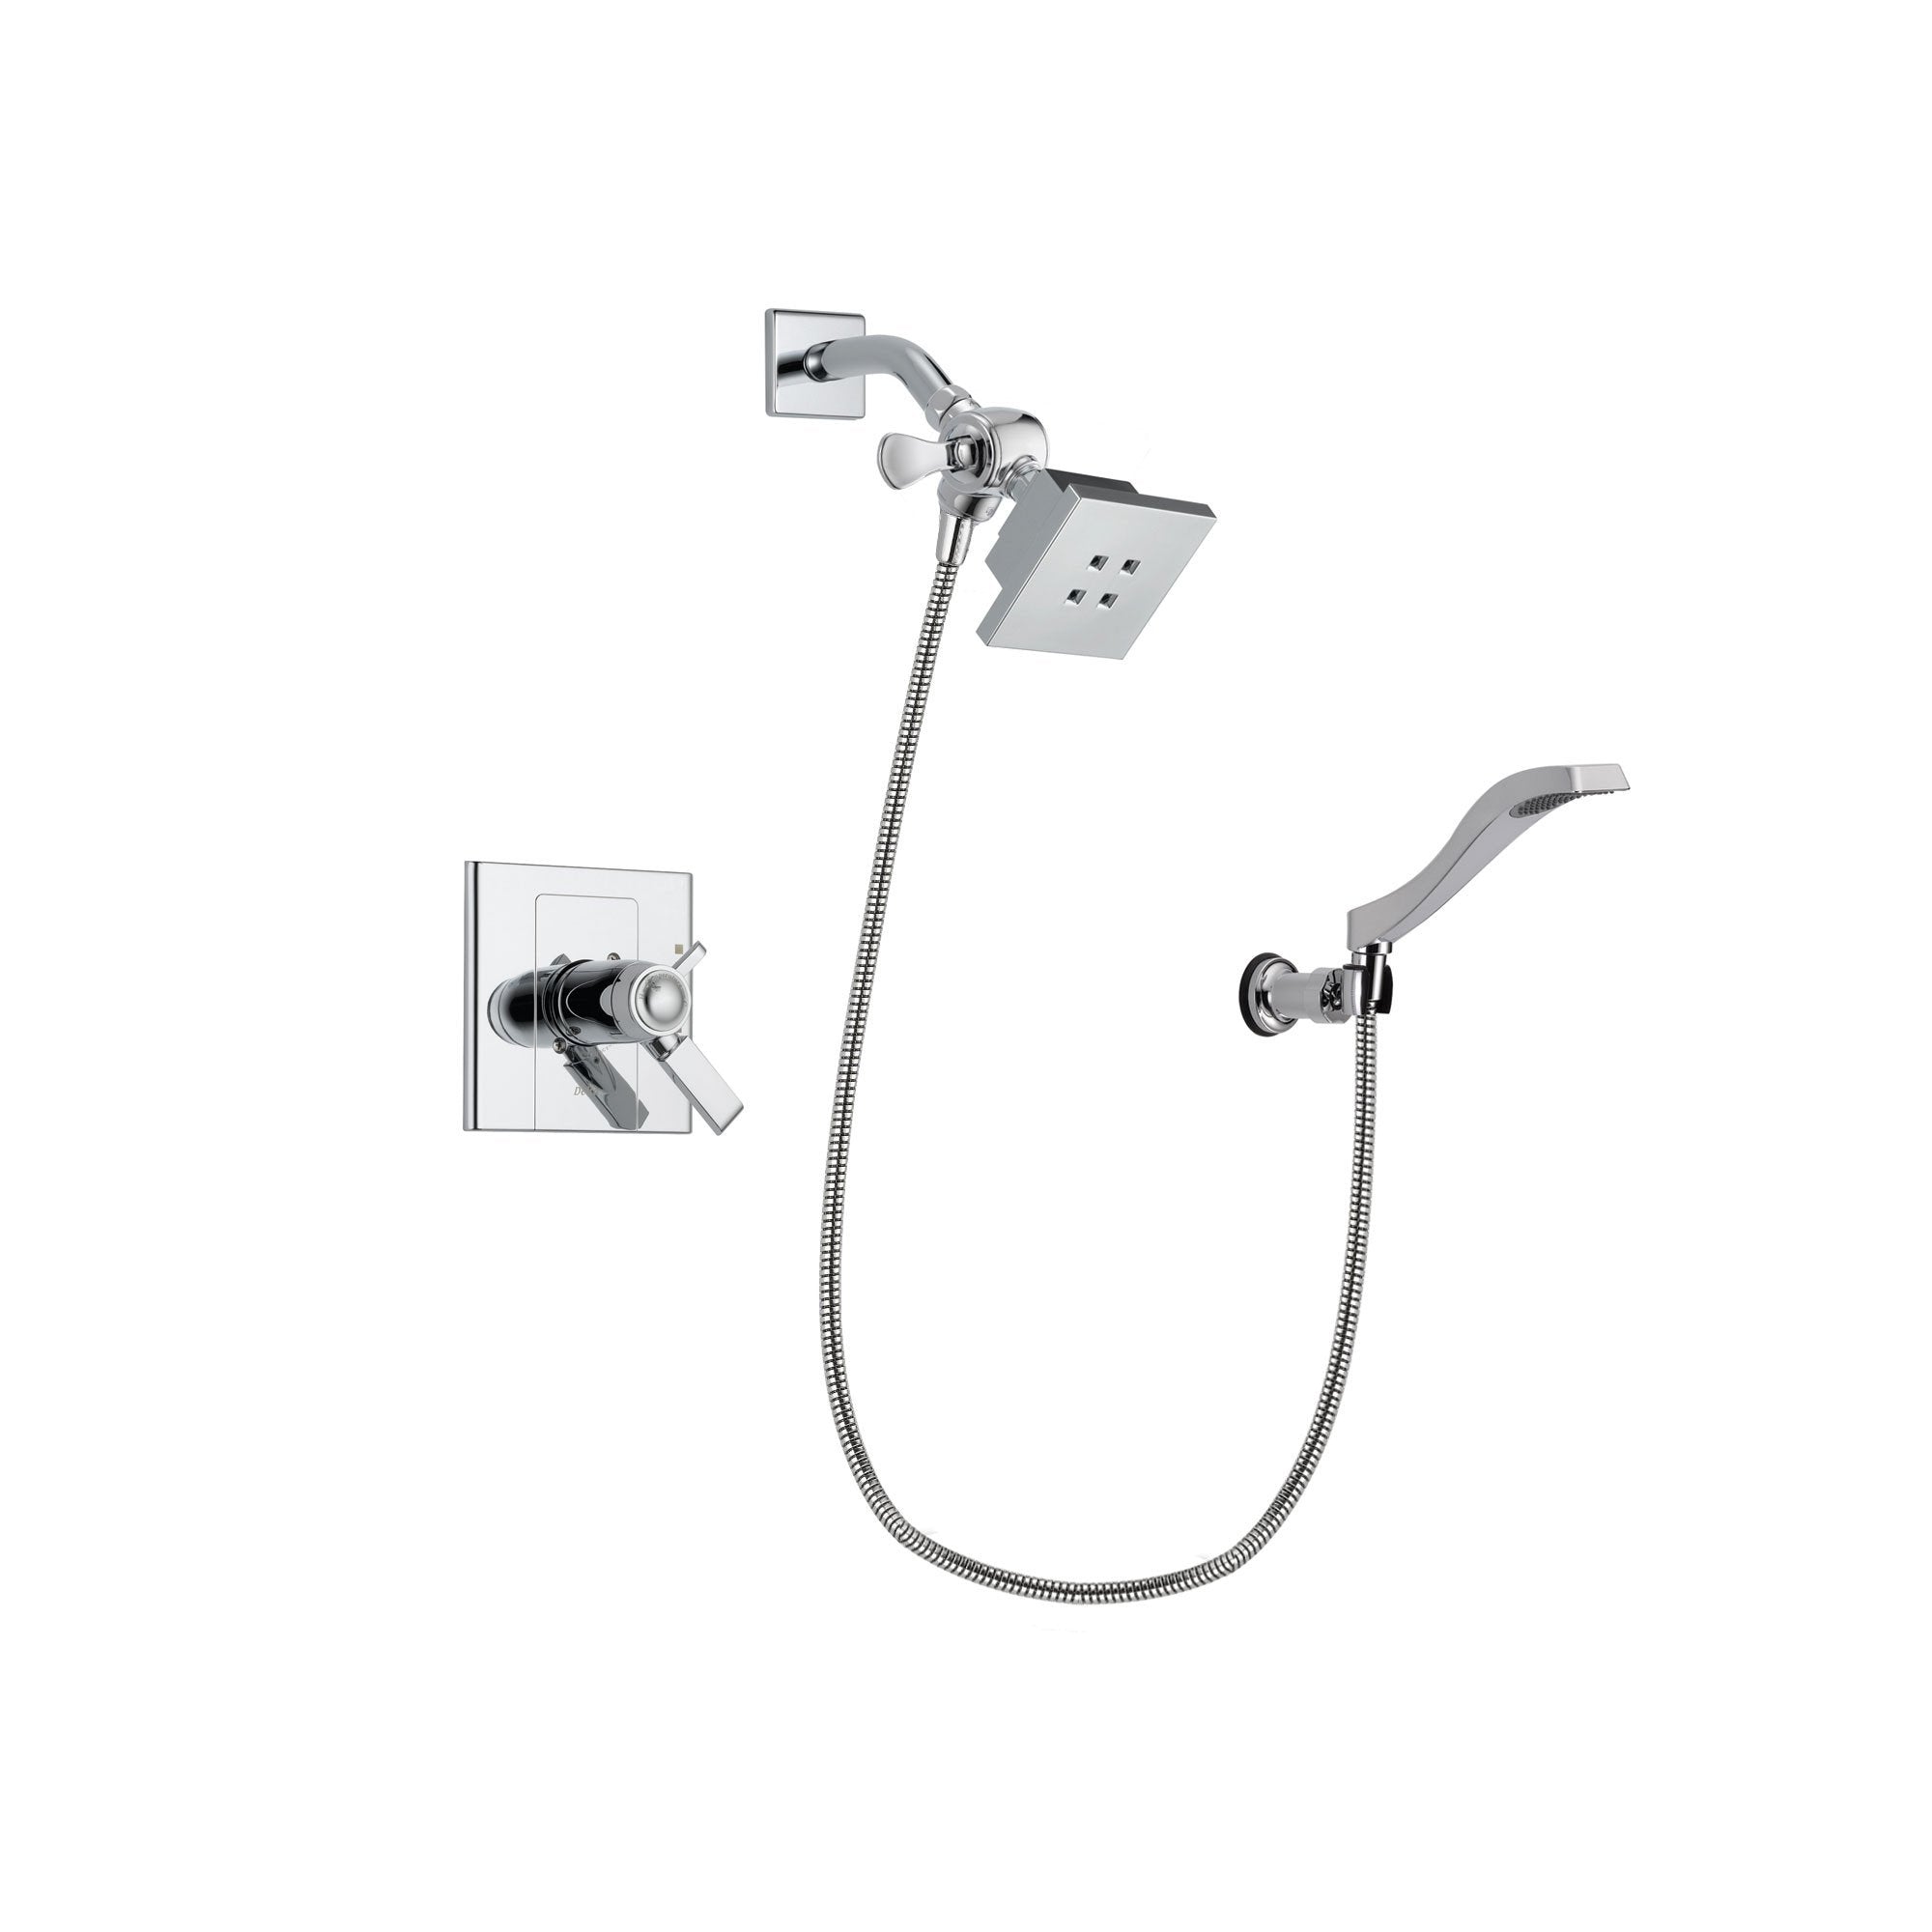 Delta Arzo Chrome Finish Thermostatic Shower Faucet System Package with Square Showerhead and Modern Handheld Shower Spray with Wall Bracket and Hose Includes Rough-in Valve DSP0005V